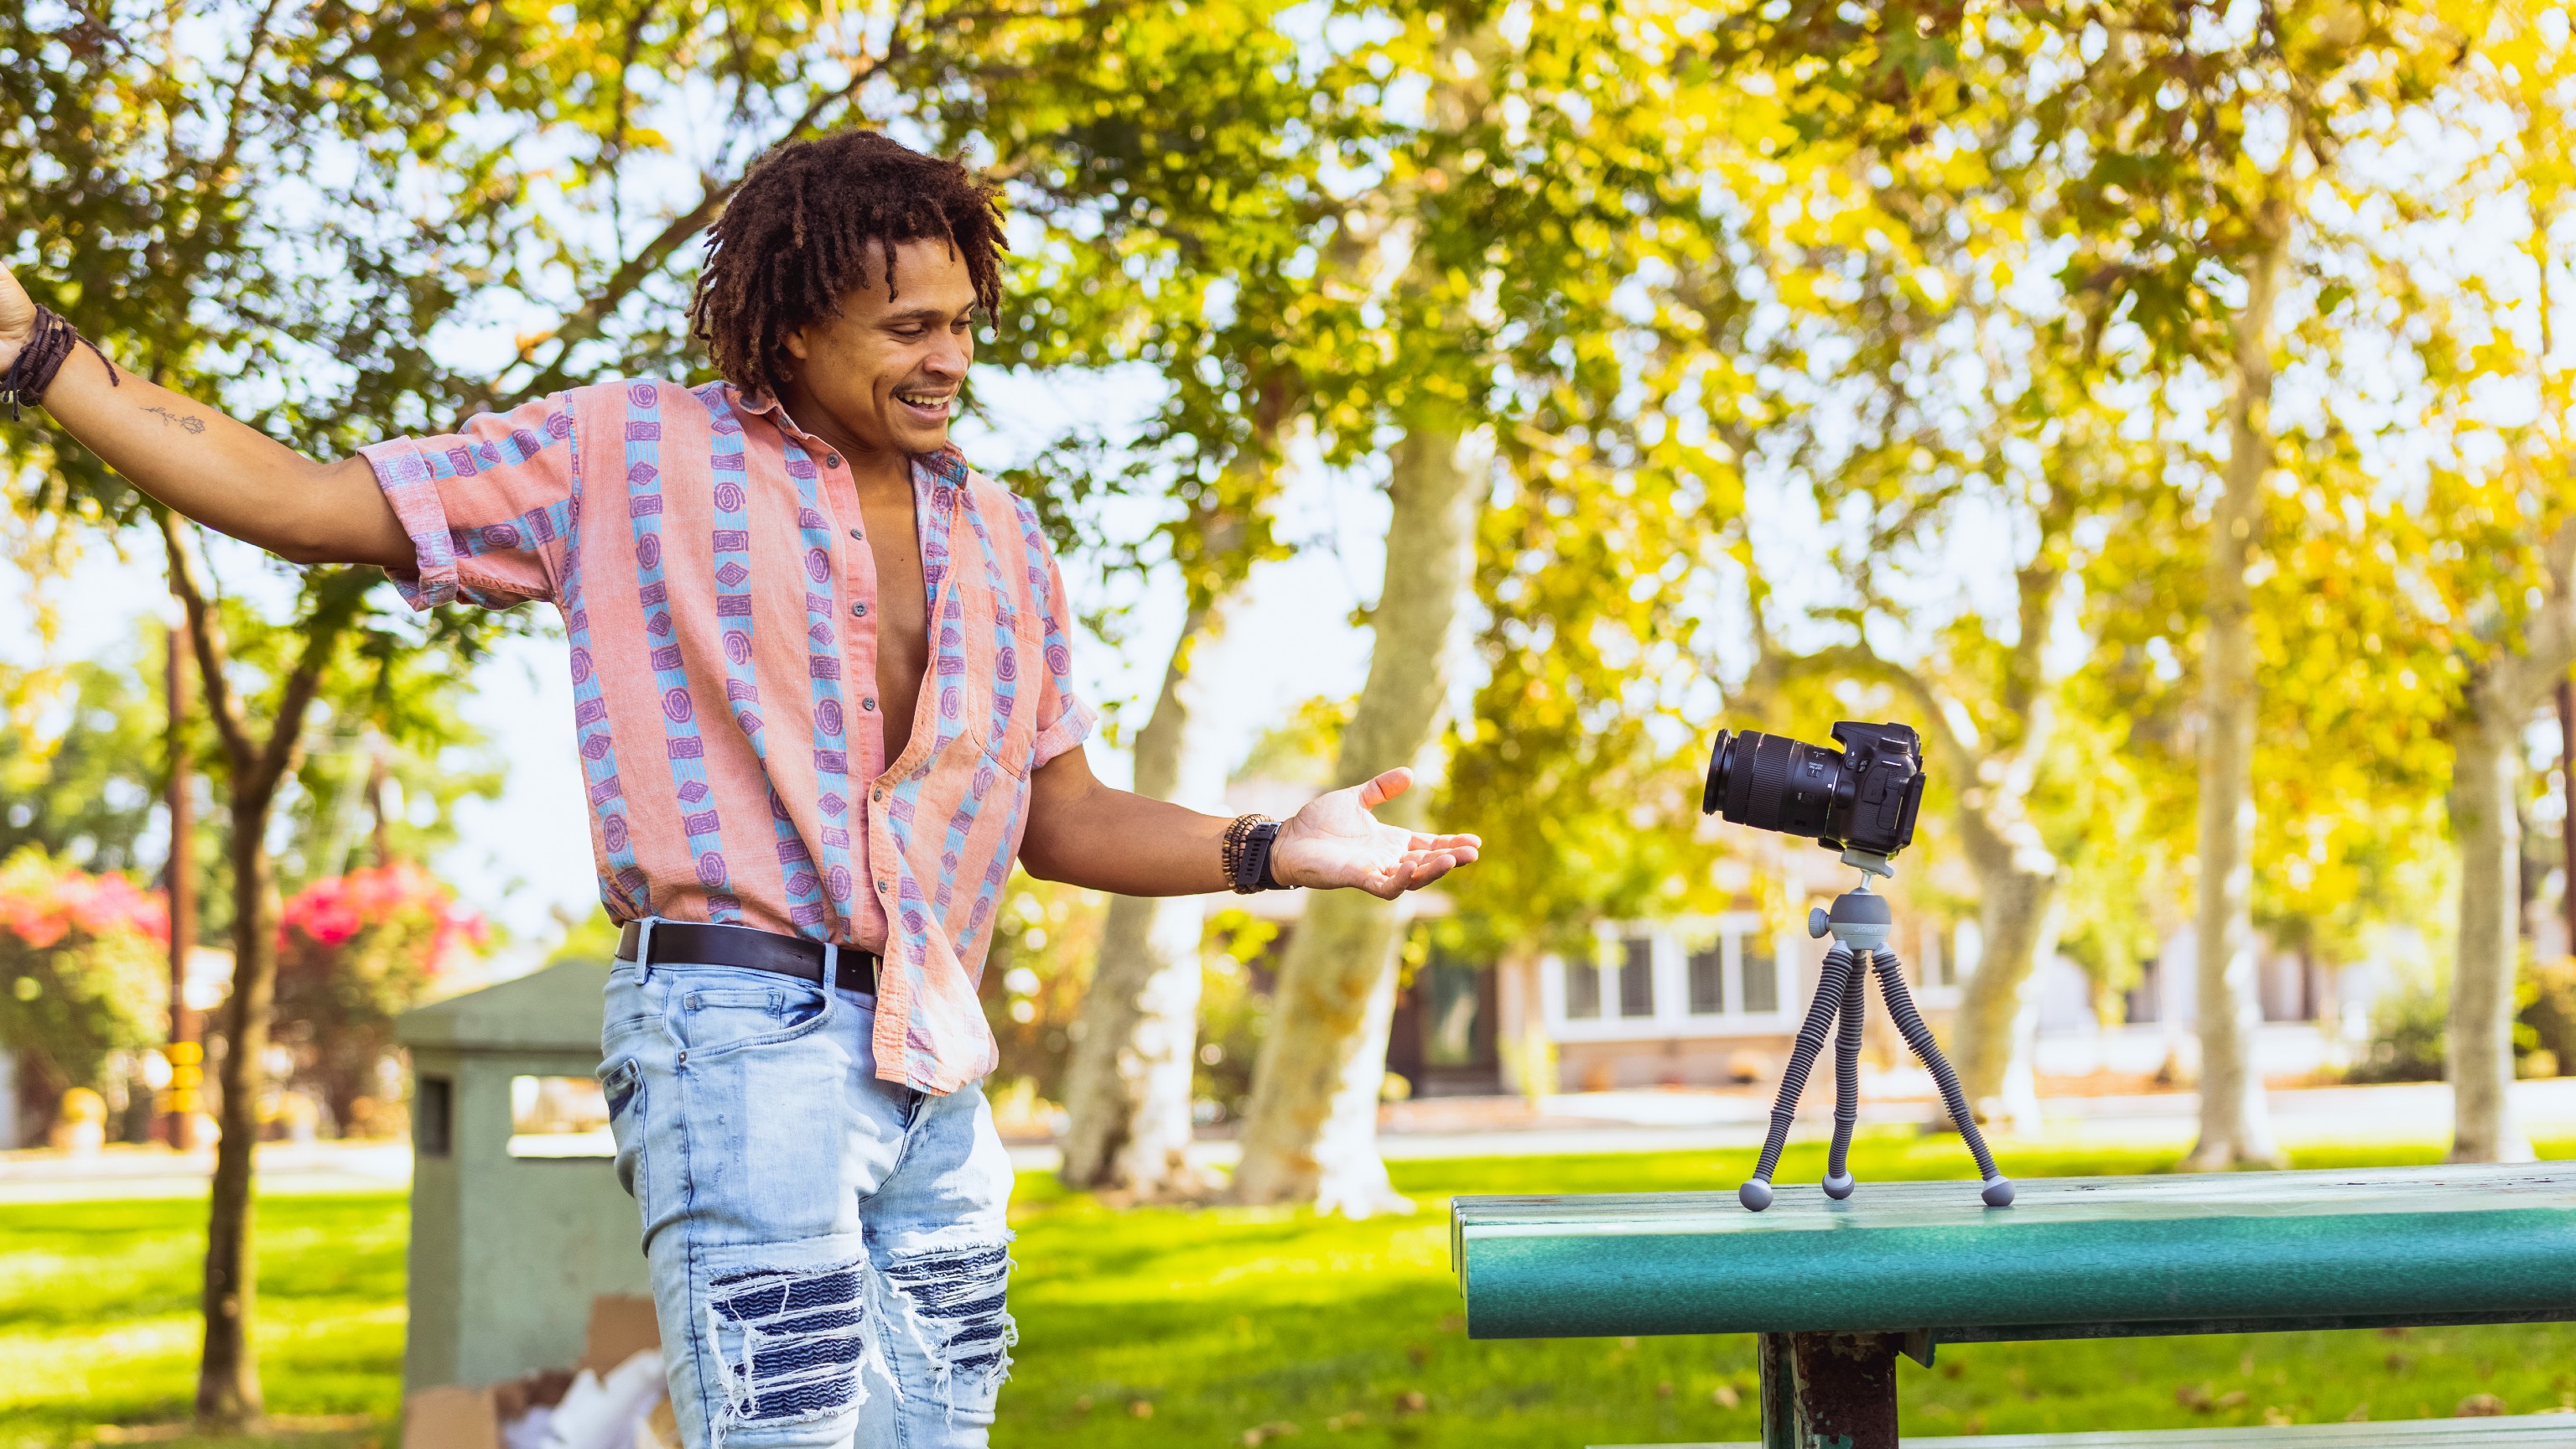 Joby launches new tripod ranges for both new and experienced vloggers |  Digital Camera World